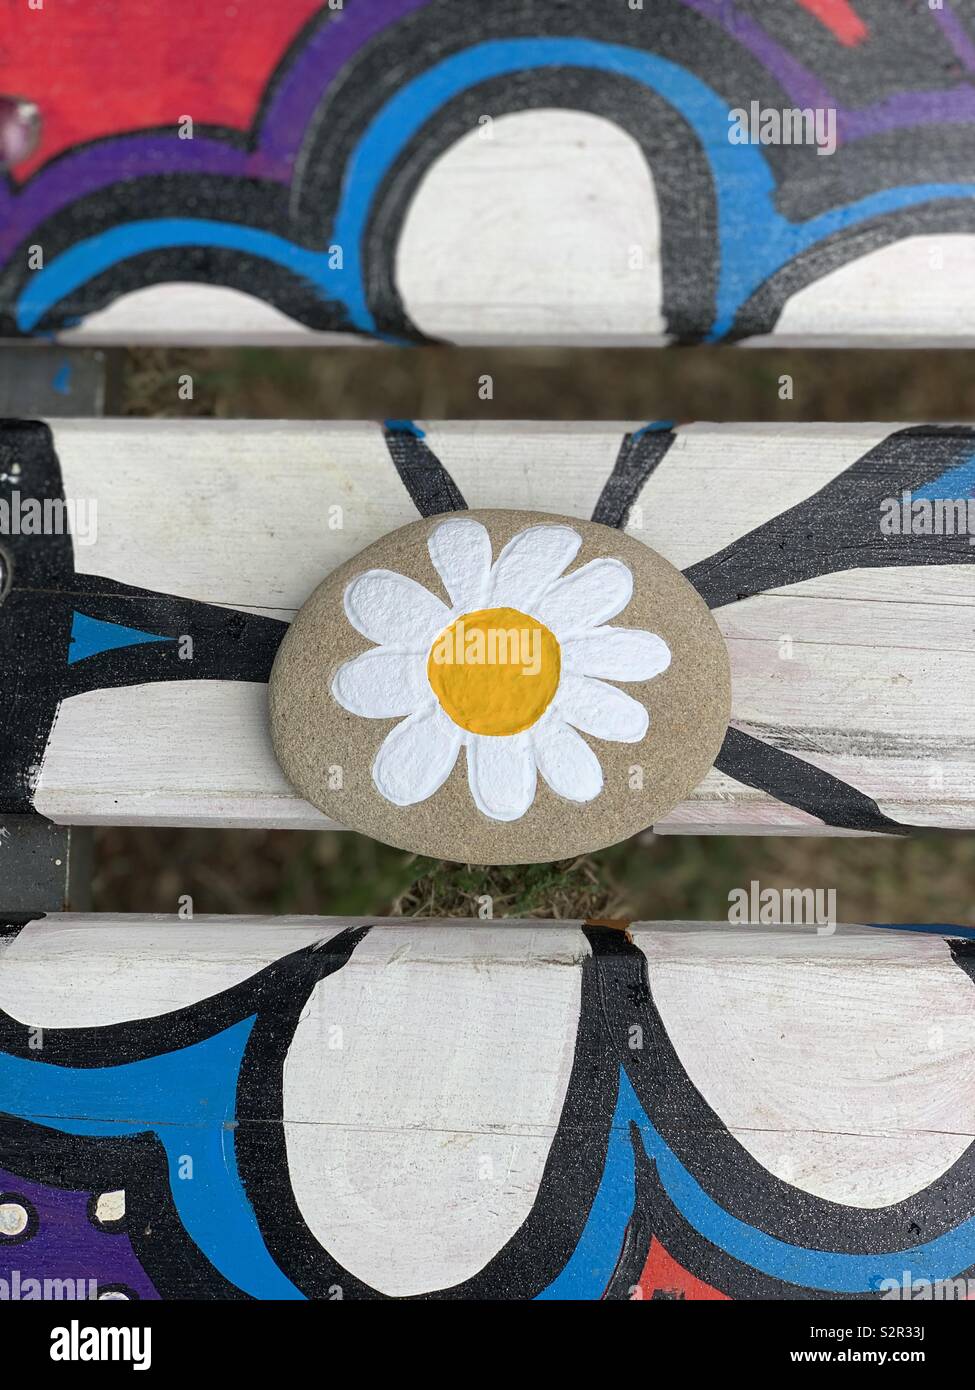 Peace message with a daisy design on a stone over a painted daisy over a public bench Stock Photo